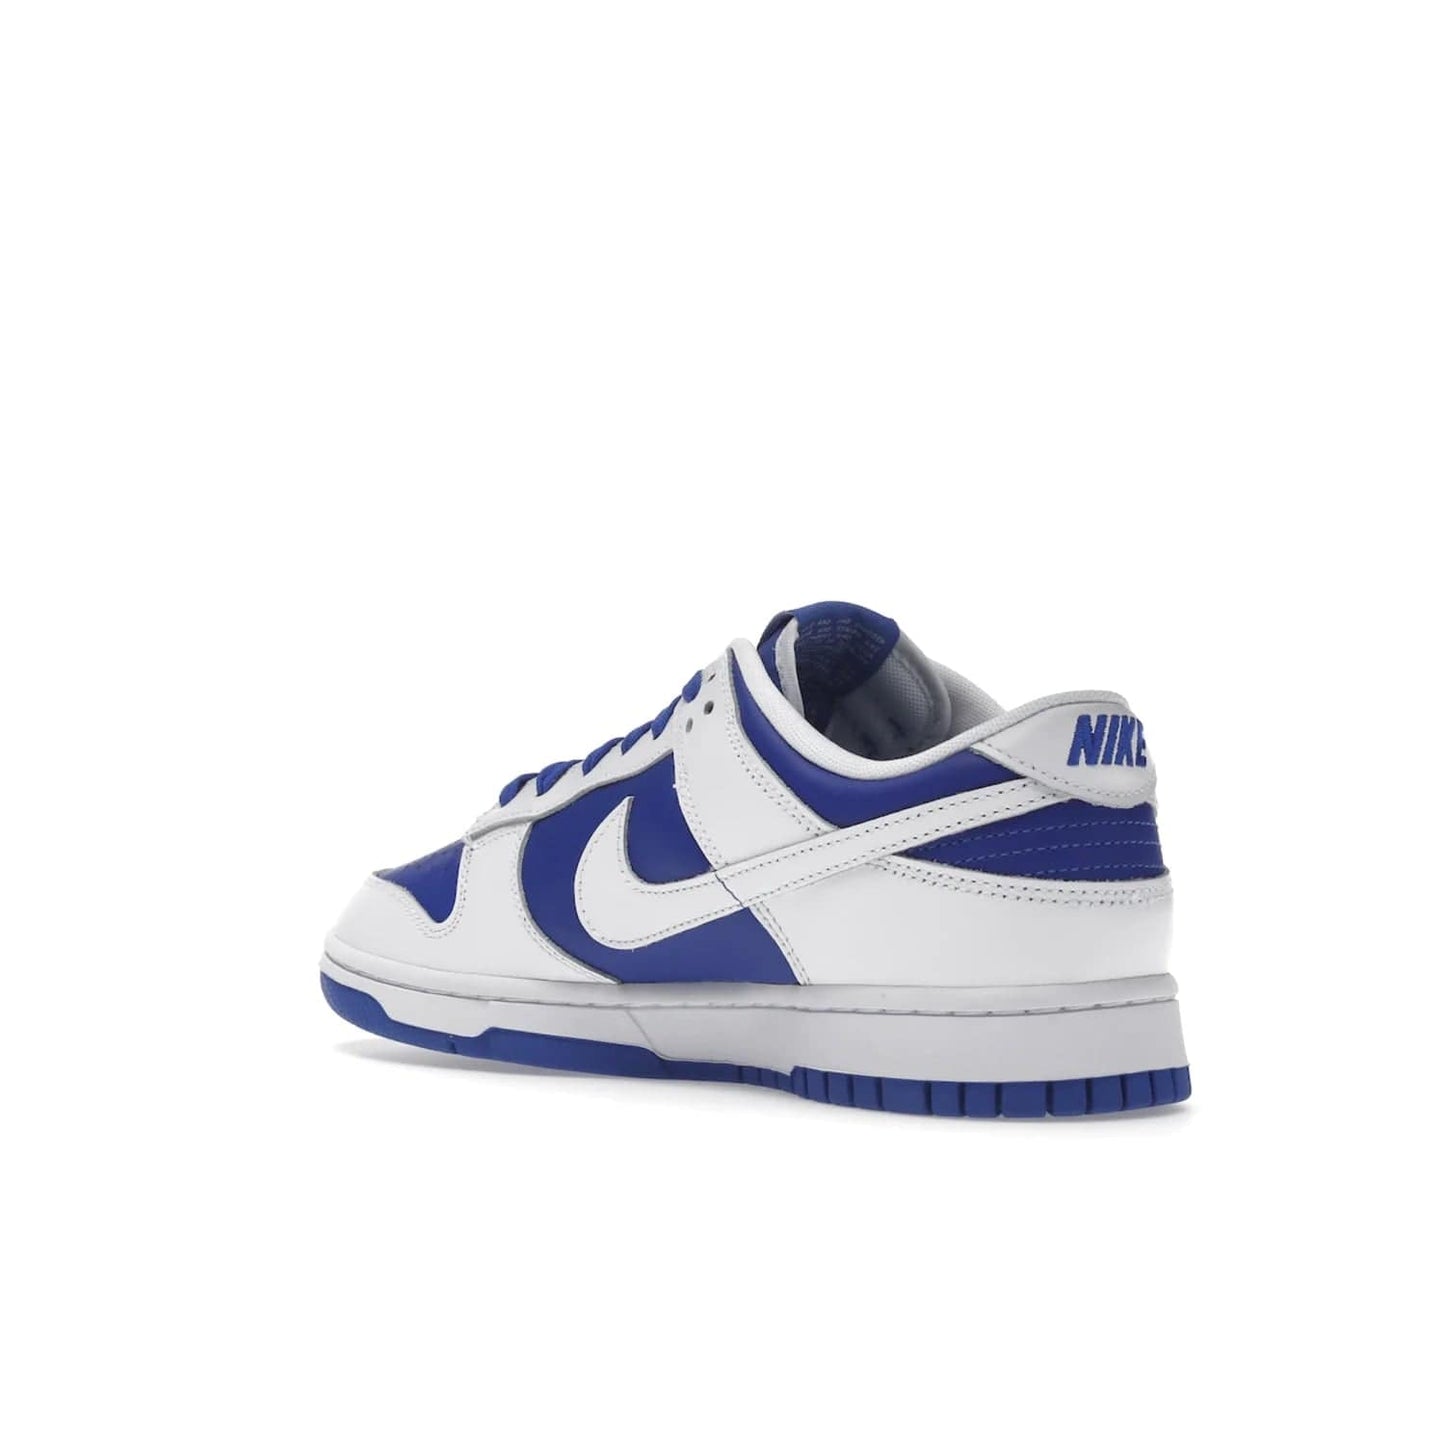 Nike Dunk Low Racer Blue White - Image 24 - Only at www.BallersClubKickz.com - Sleek Racer Blue leather upper and white leather overlays make up the Nike Dunk Low Racer Blue White. Woven tag and heel embroidery for a 1985 Dunk look with a matching EVA foam sole completes the classic colorway.